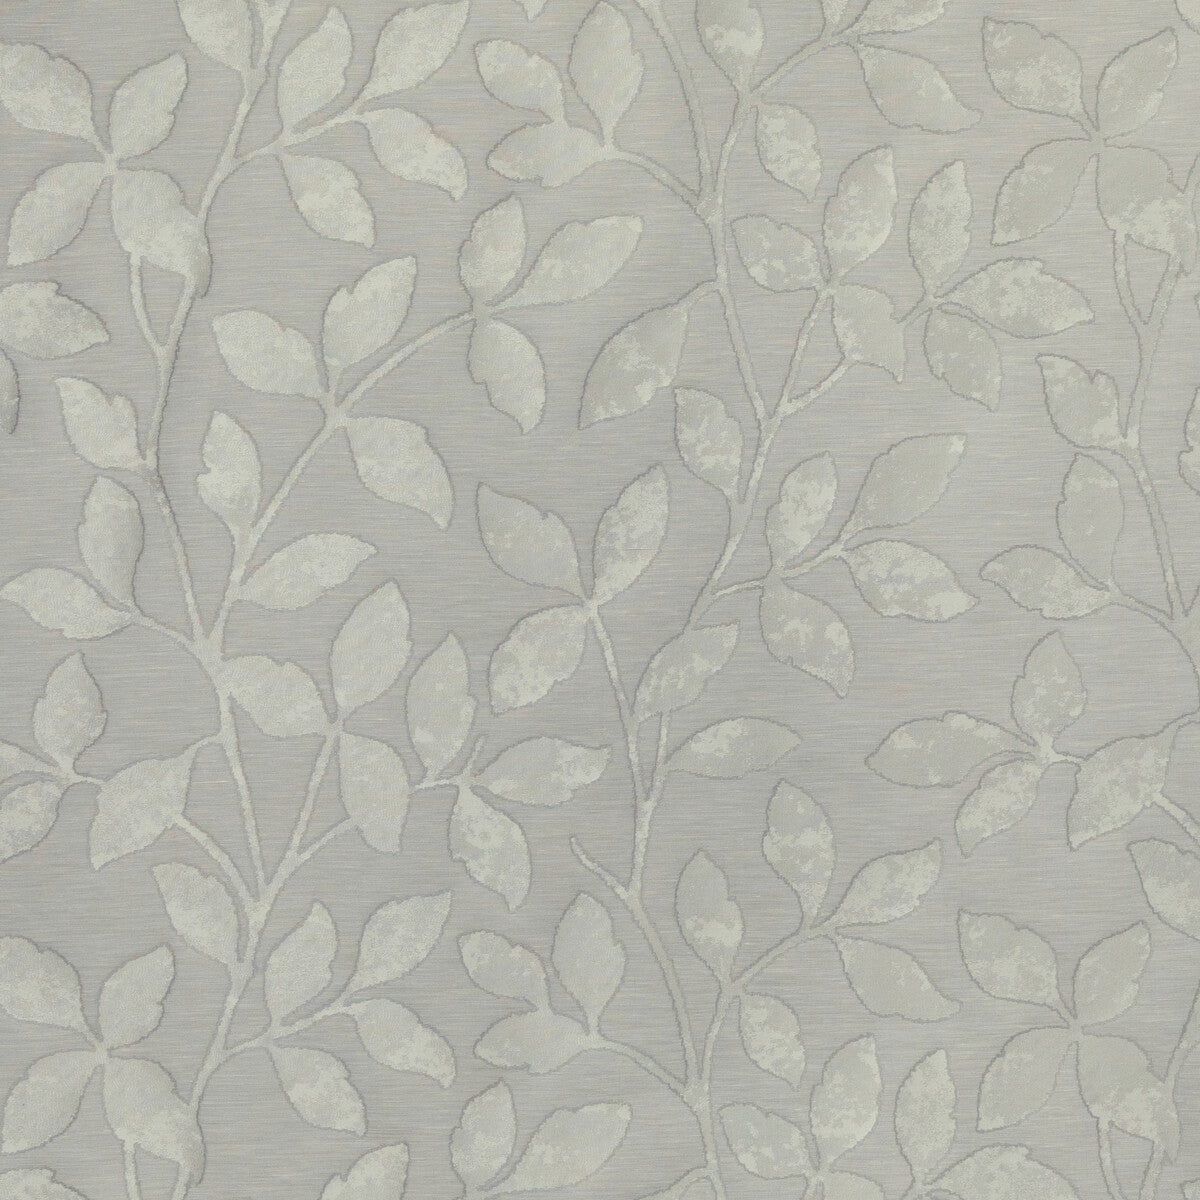 Leaf Me Alone fabric in platinum color - pattern 4997.11.0 - by Kravet Design in the Candice Olson collection